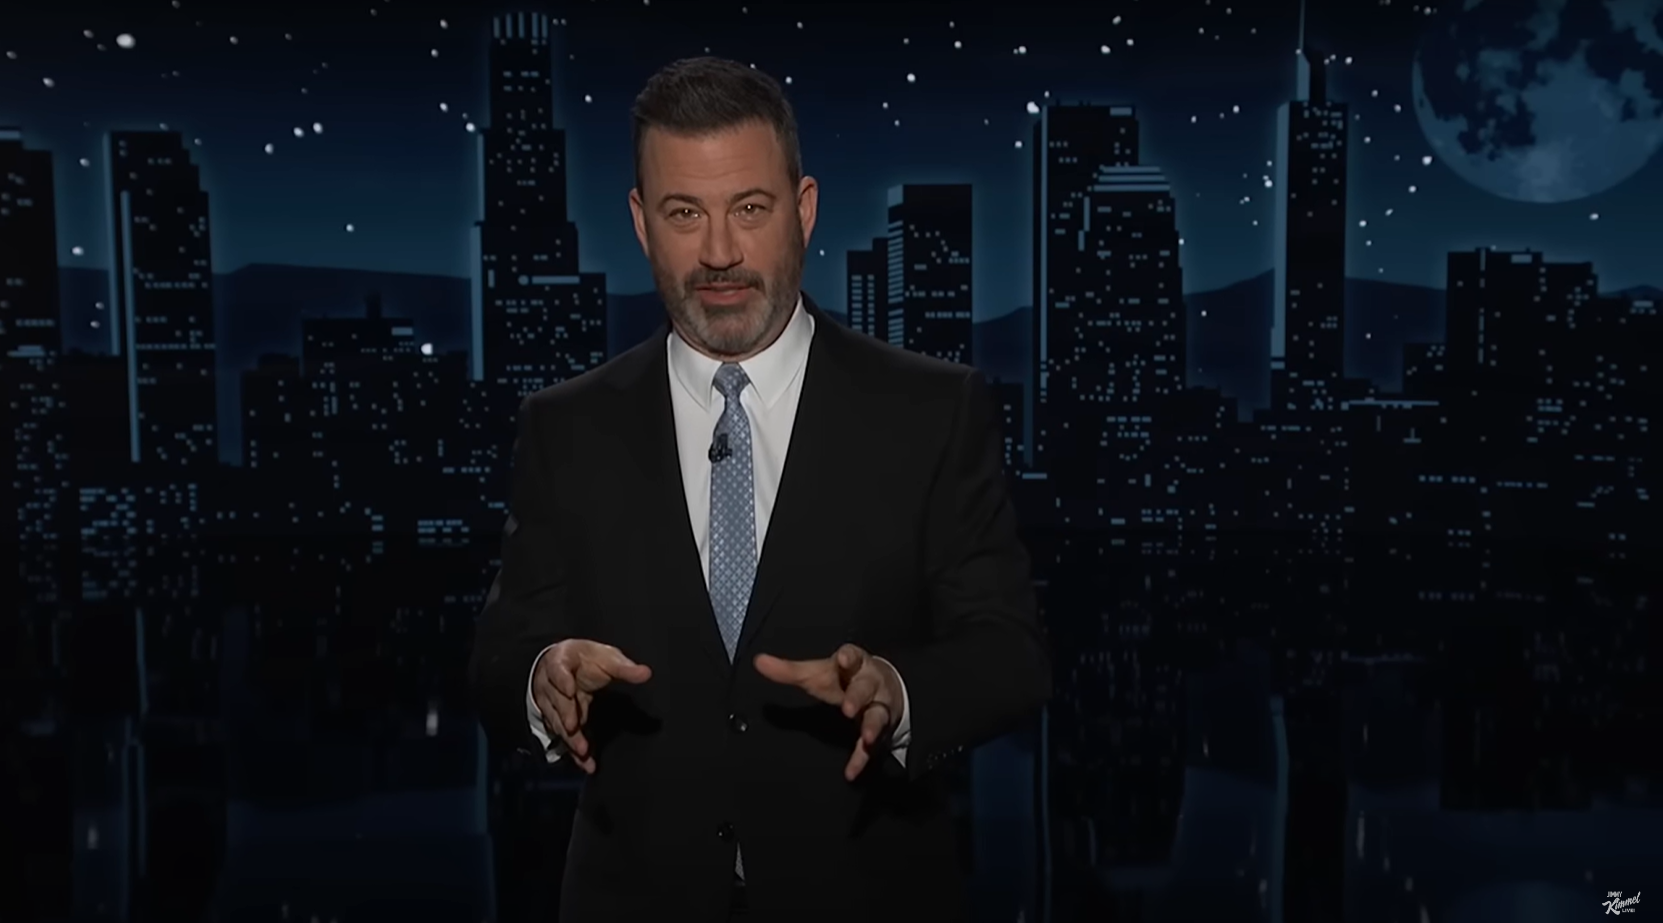 Kimmel reacts to Trump endorsing his daughter-in-law for the RNC